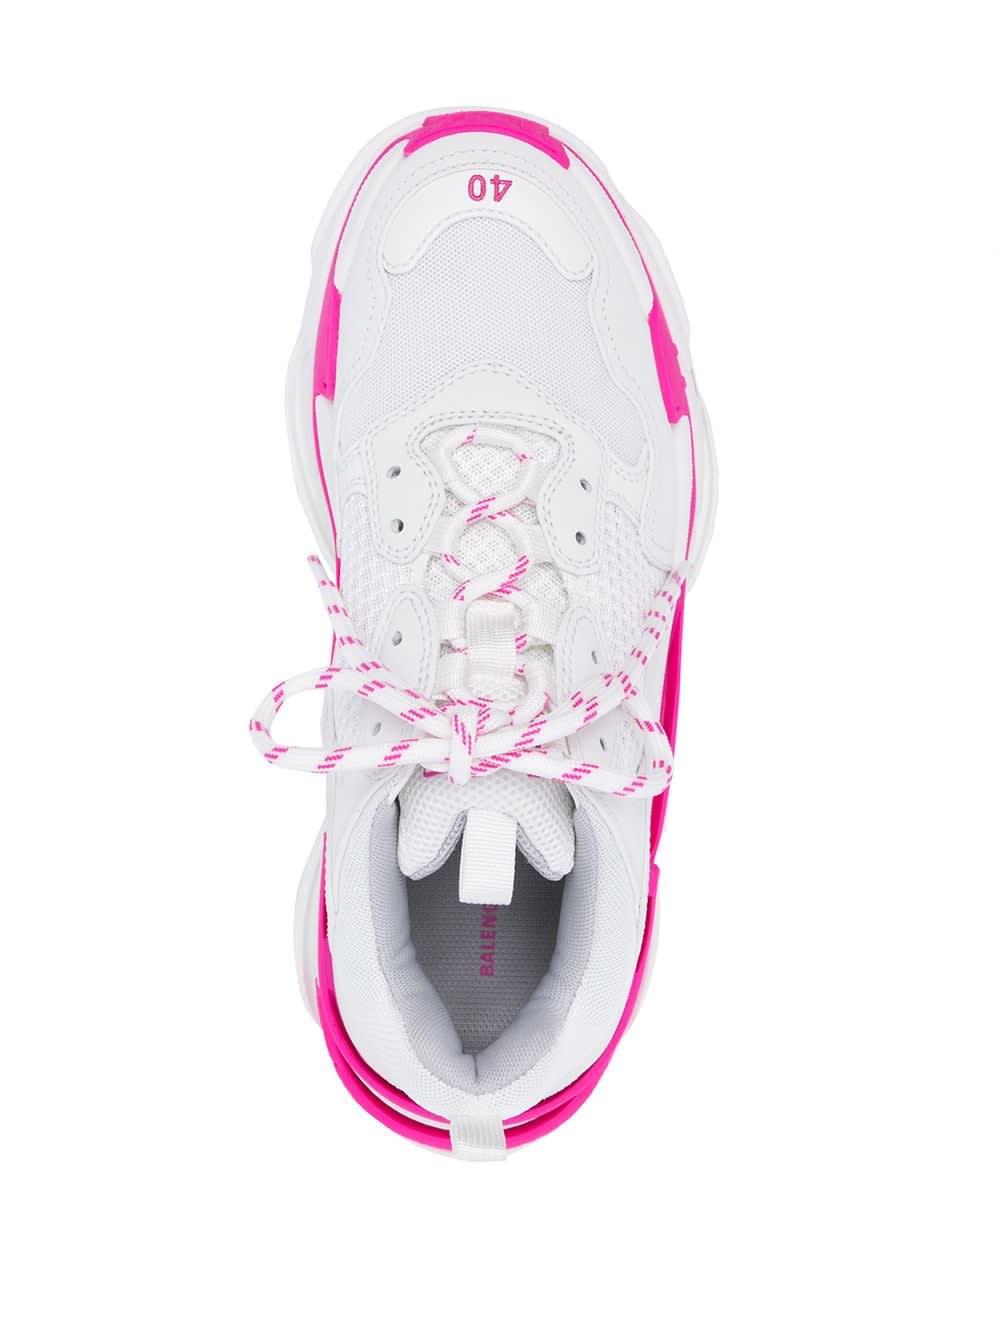 Balenciaga White And Pink Triple S Sneakers | Lyst